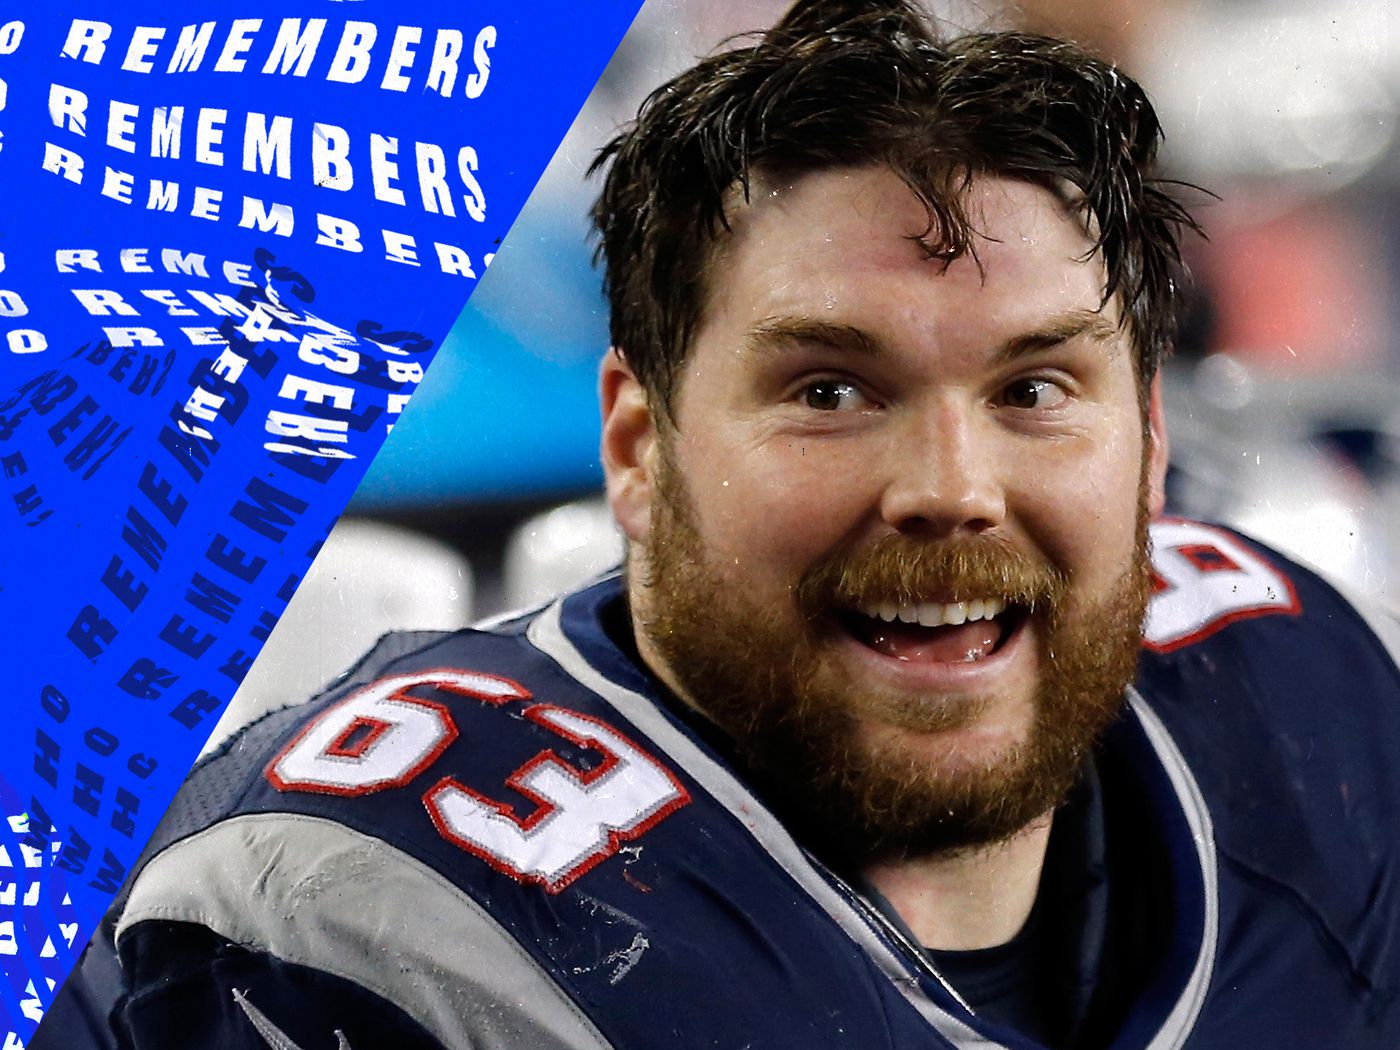 Dan Connolly lived a lineman's dream with his NFL-record kick ...